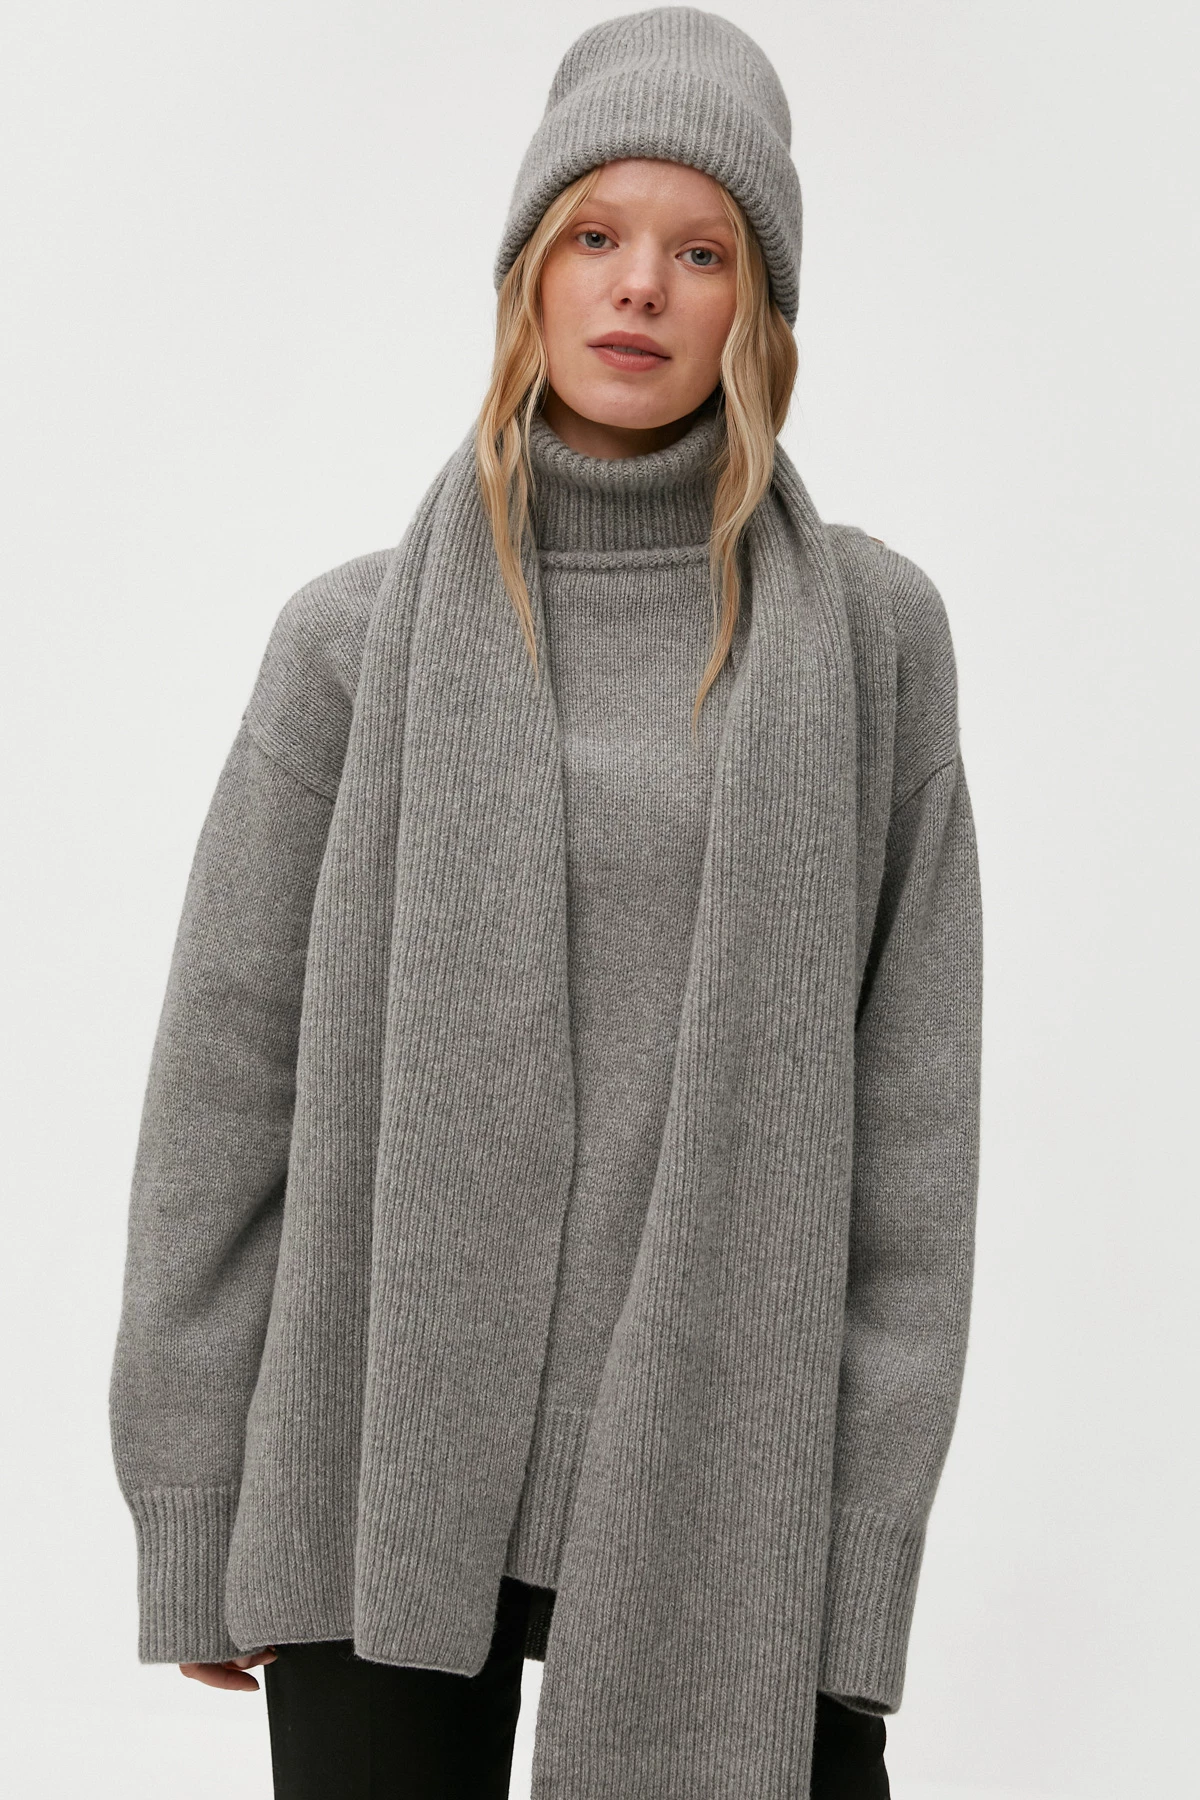 Cashmere grey high neck loose-fit sweater, photo 5